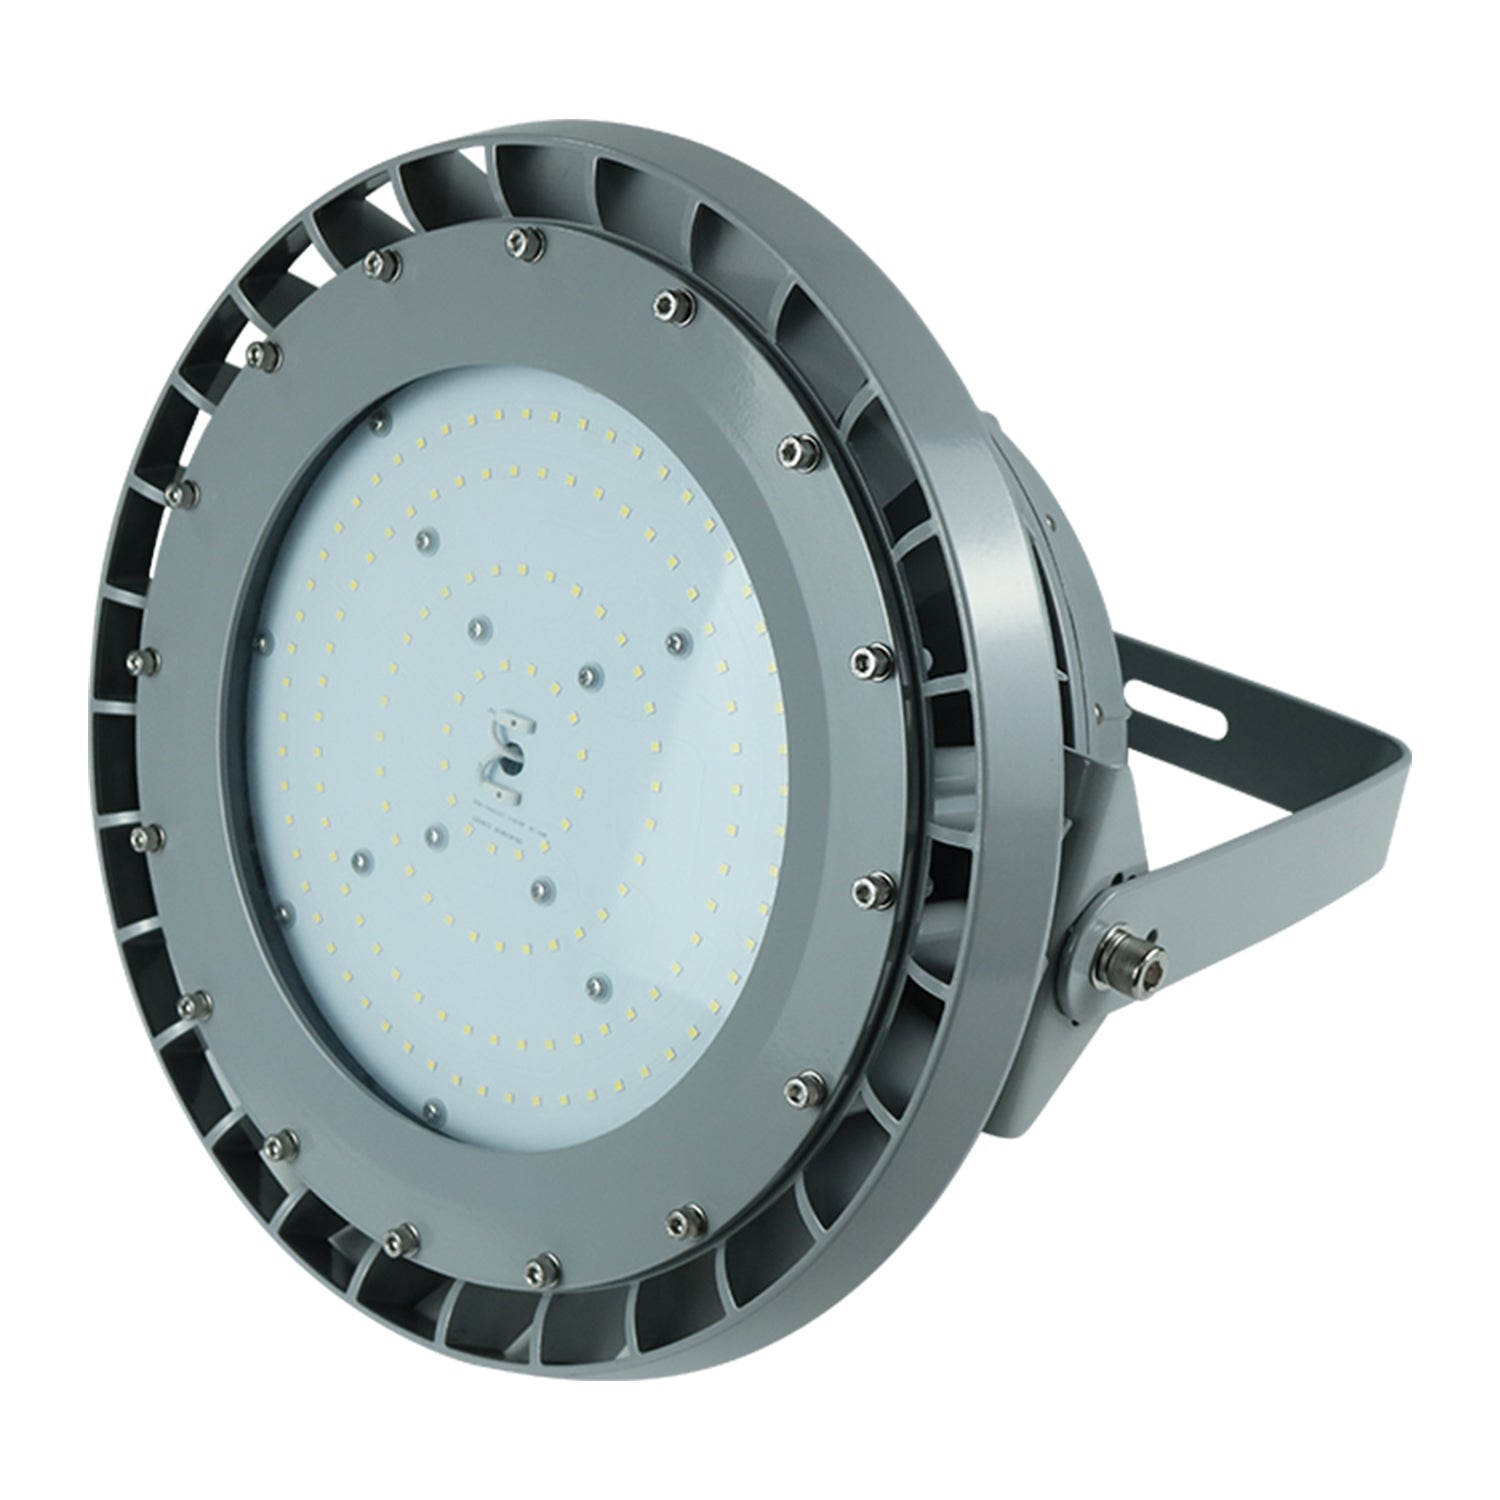 B Series 60W LED Explosion Proof Round High Bay Light - Non Dimmable, 5000K, 8400LM, IP66 Rated for Hazardous Locations